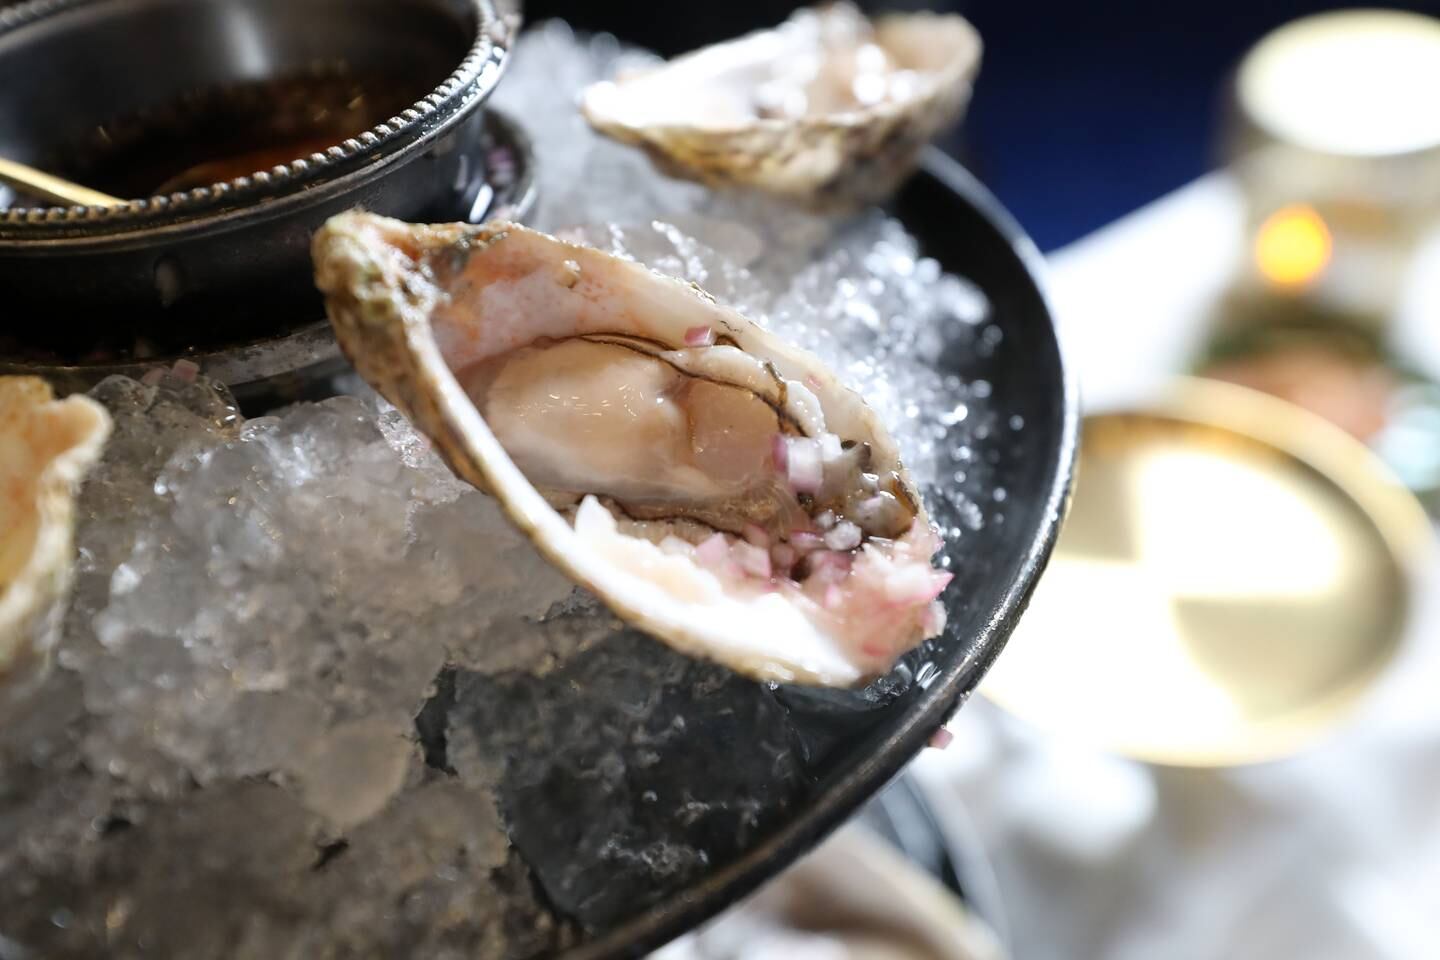 Oysters at Dubai's new ice bar. Chris Whiteoak / The National